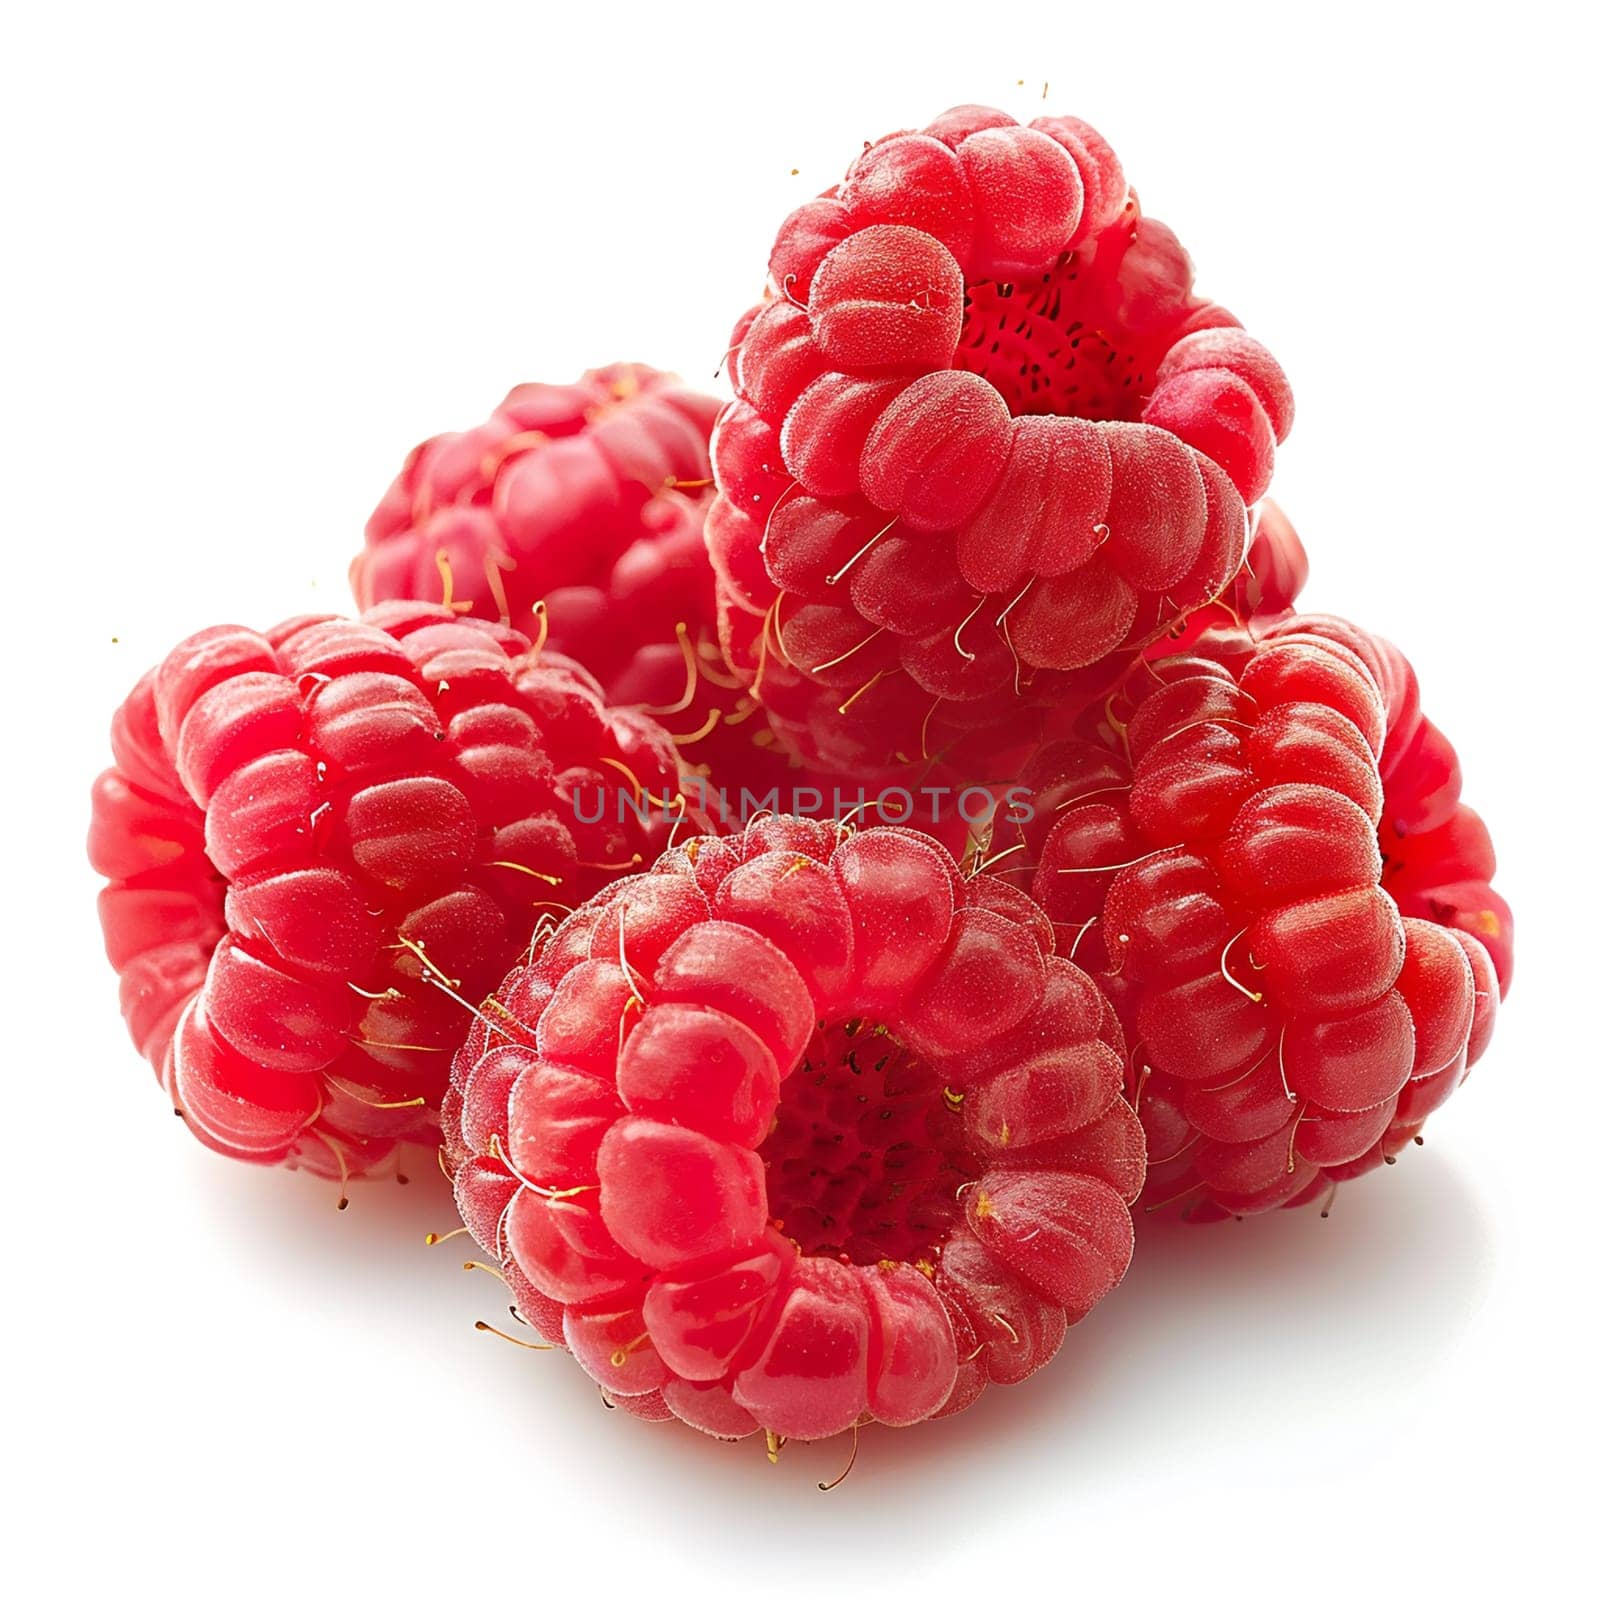 Close-up view of juicy fresh raspberries isolated on pure white background, showcasing natural texture and vibrant colors.